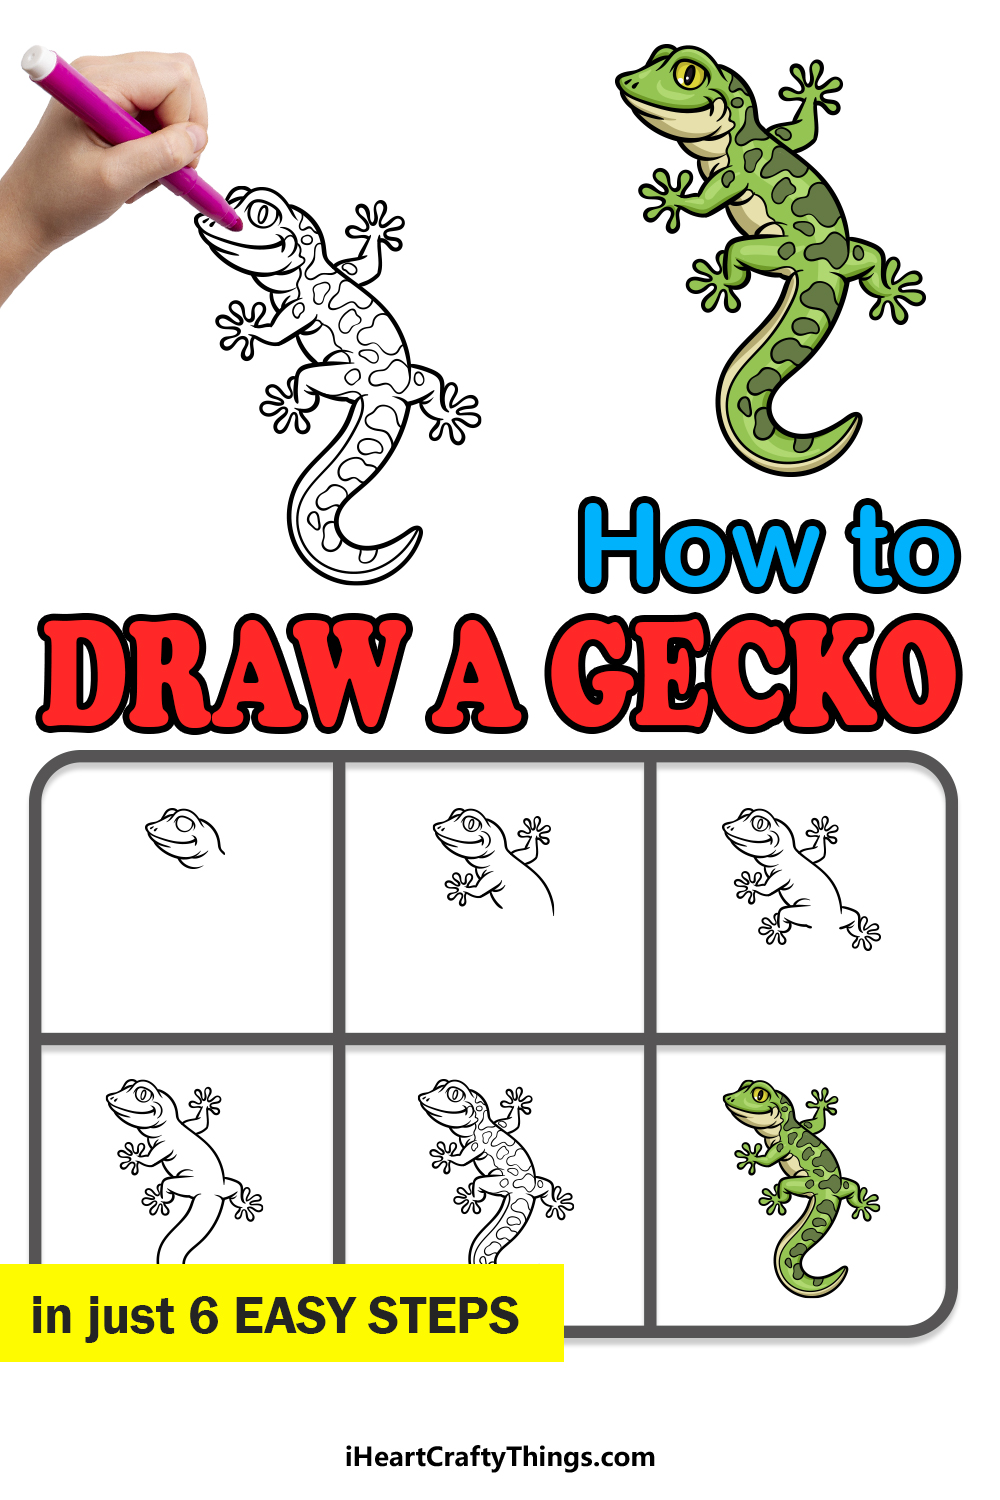 how to draw a Gecko in 6 easy steps